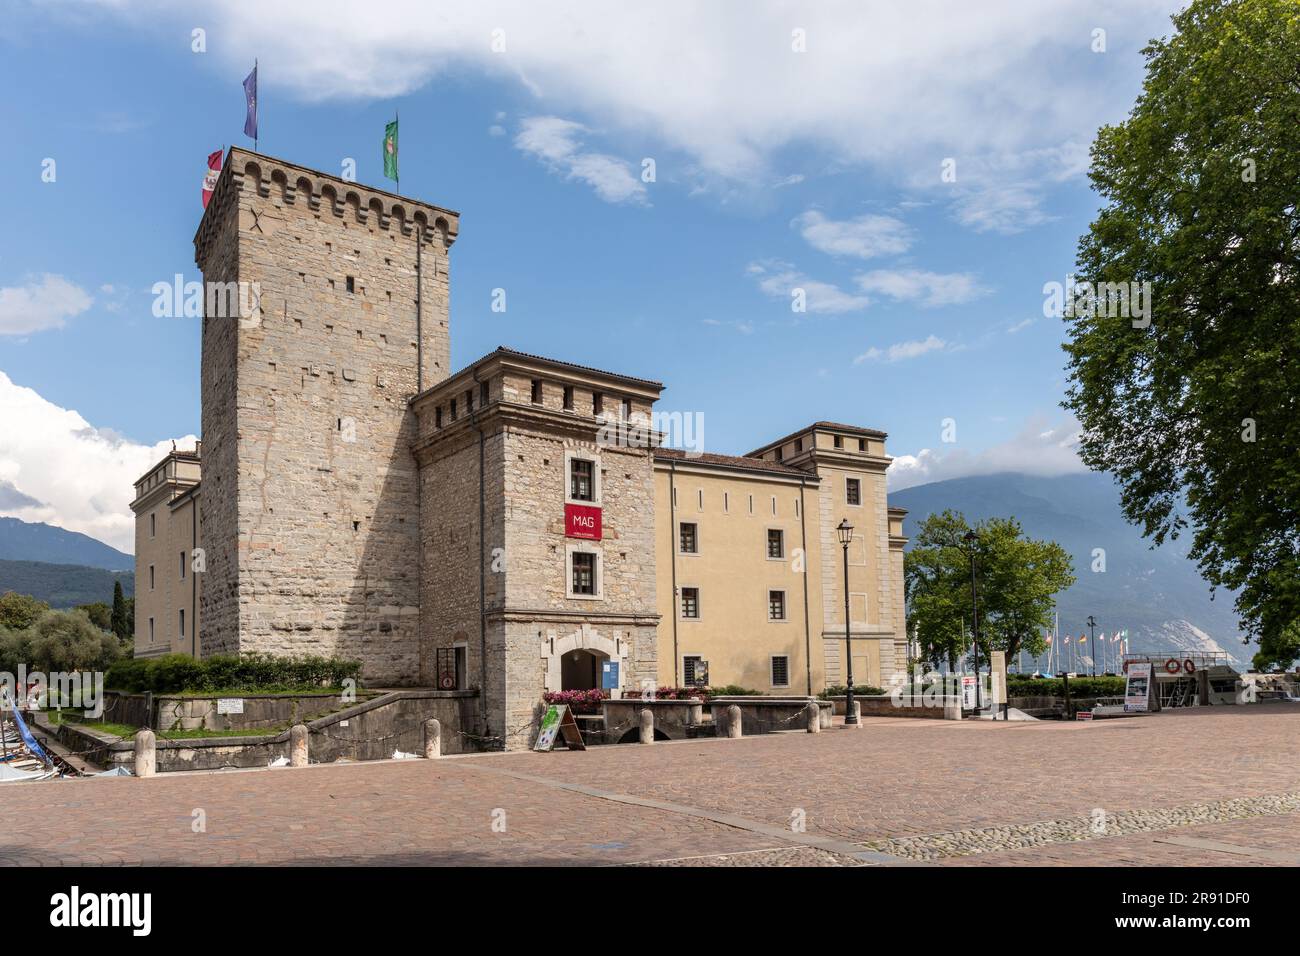 Riva town museum (Museo Civico) housed in the castle or fortress, the Rocca. Riva, Lake Garda, Italy, Europe Stock Photo